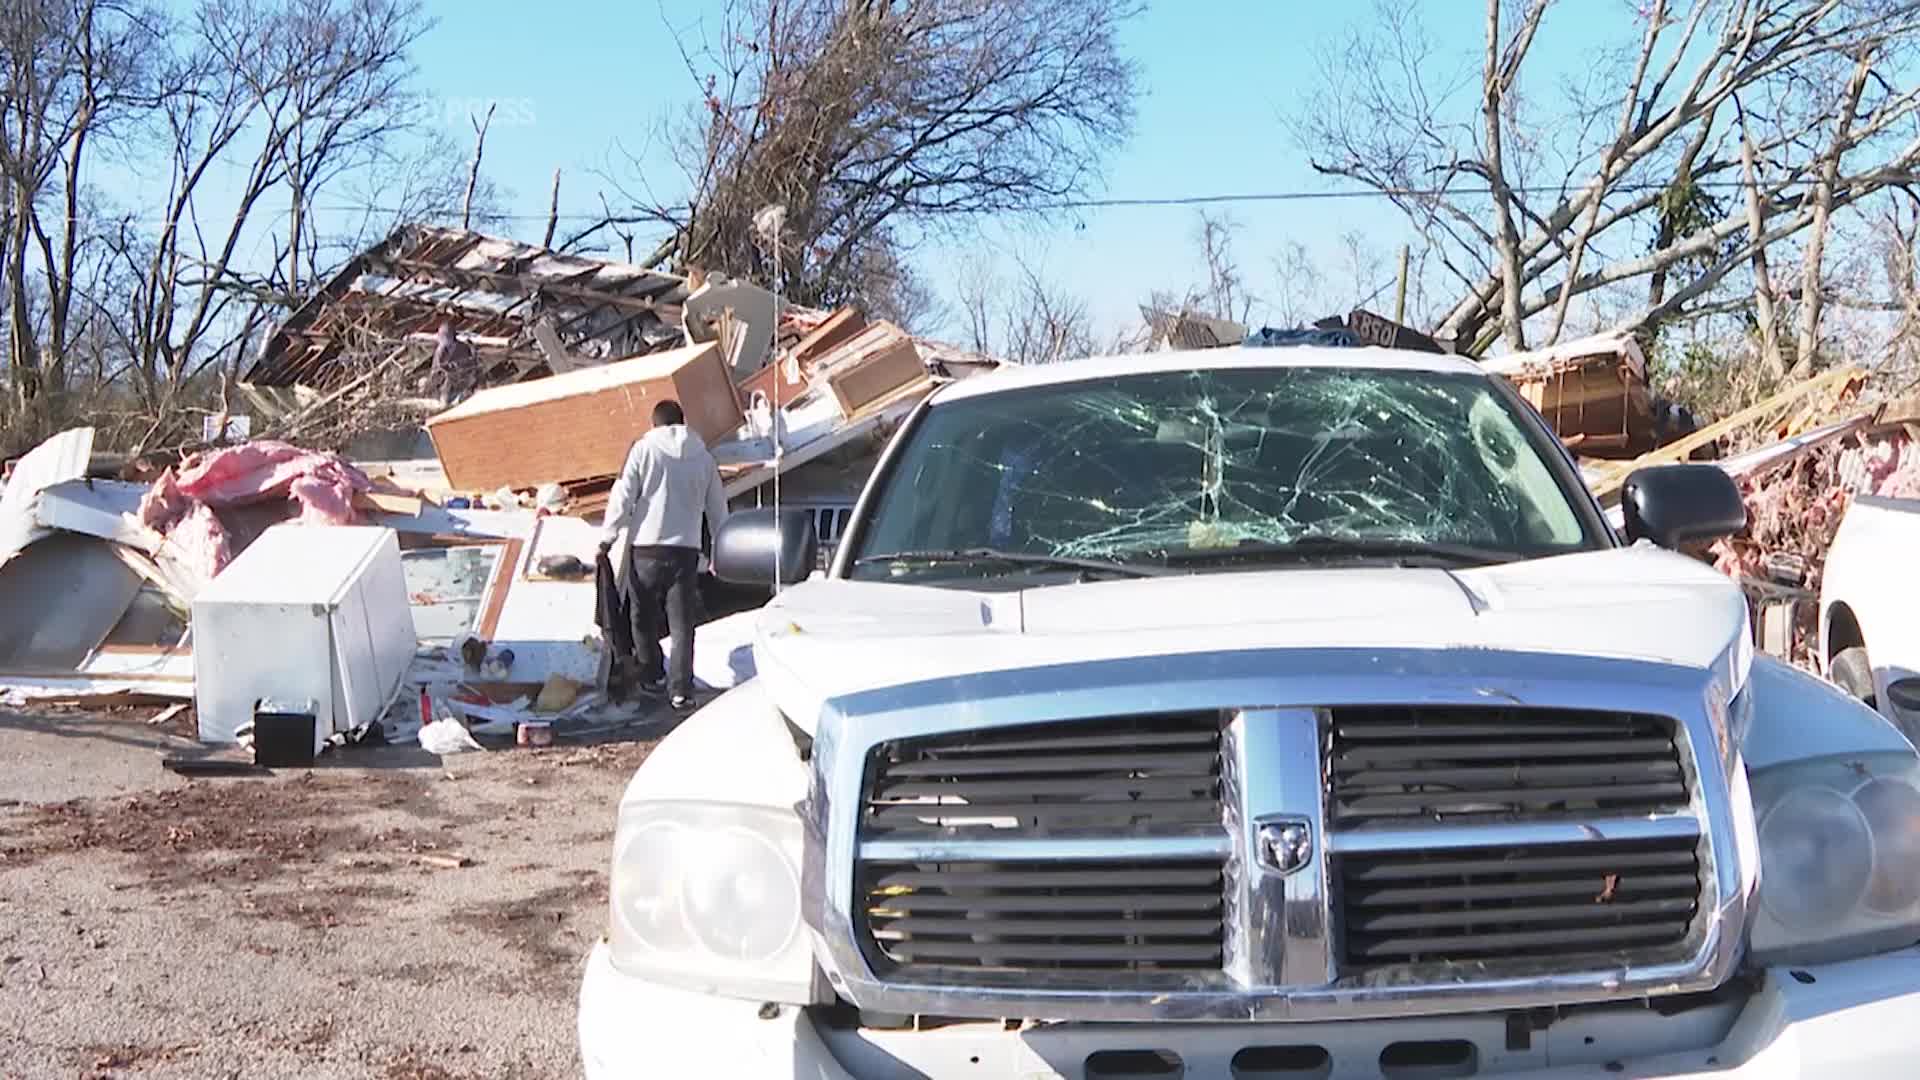 Friends and family mourn those killed after tornadoes strike in Tennessee